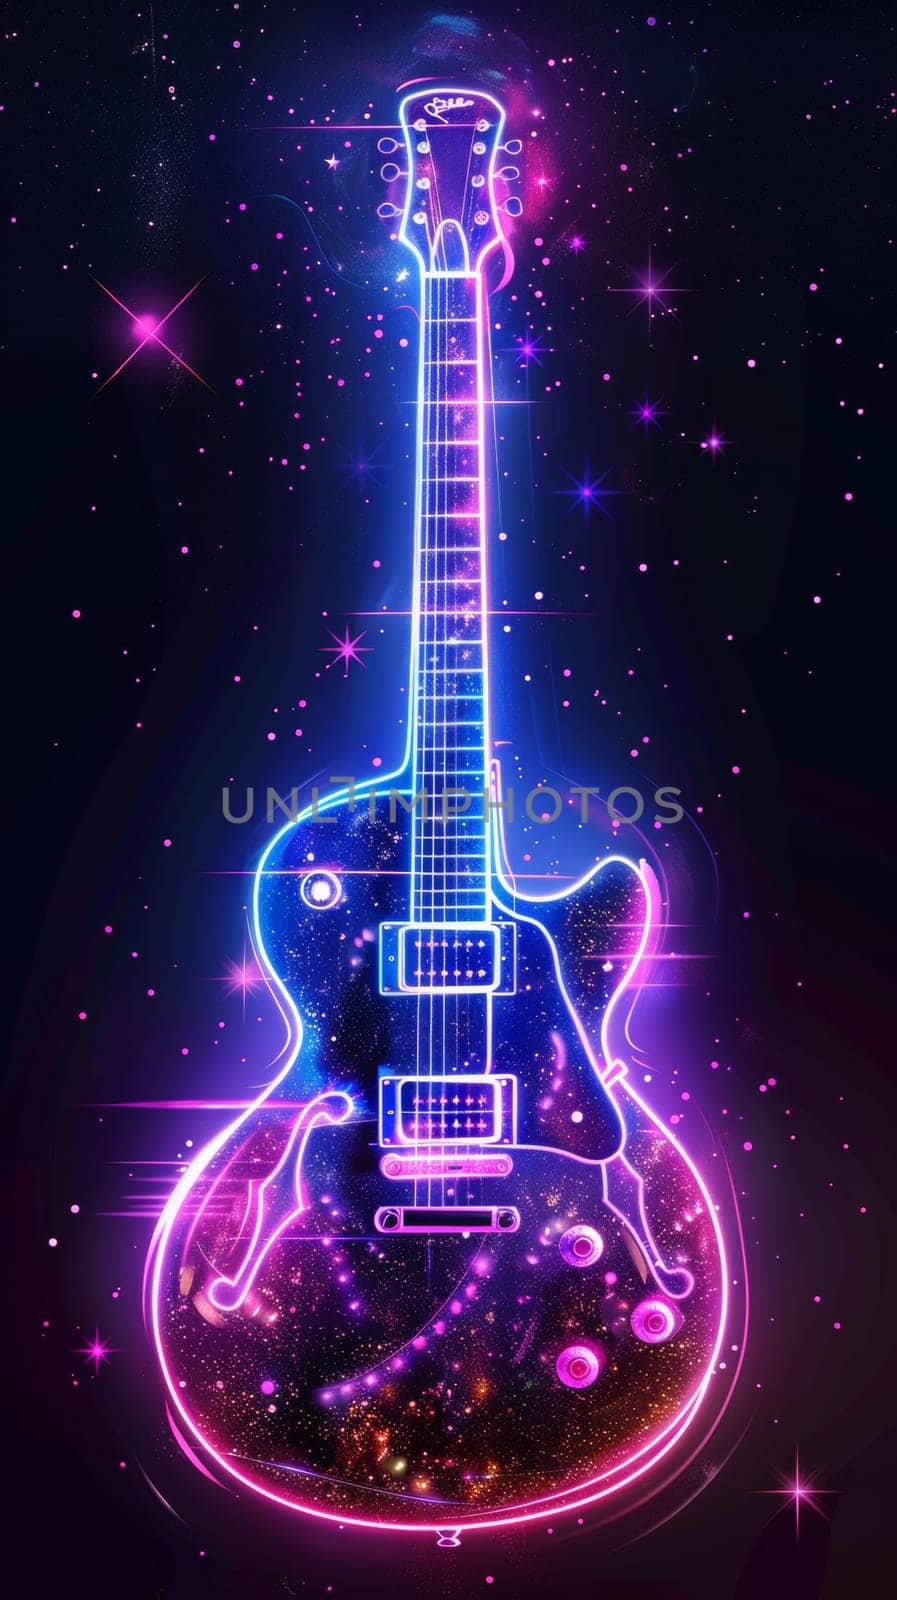 A glowing purple and blue electric guitar with neon lights isolated on black background.